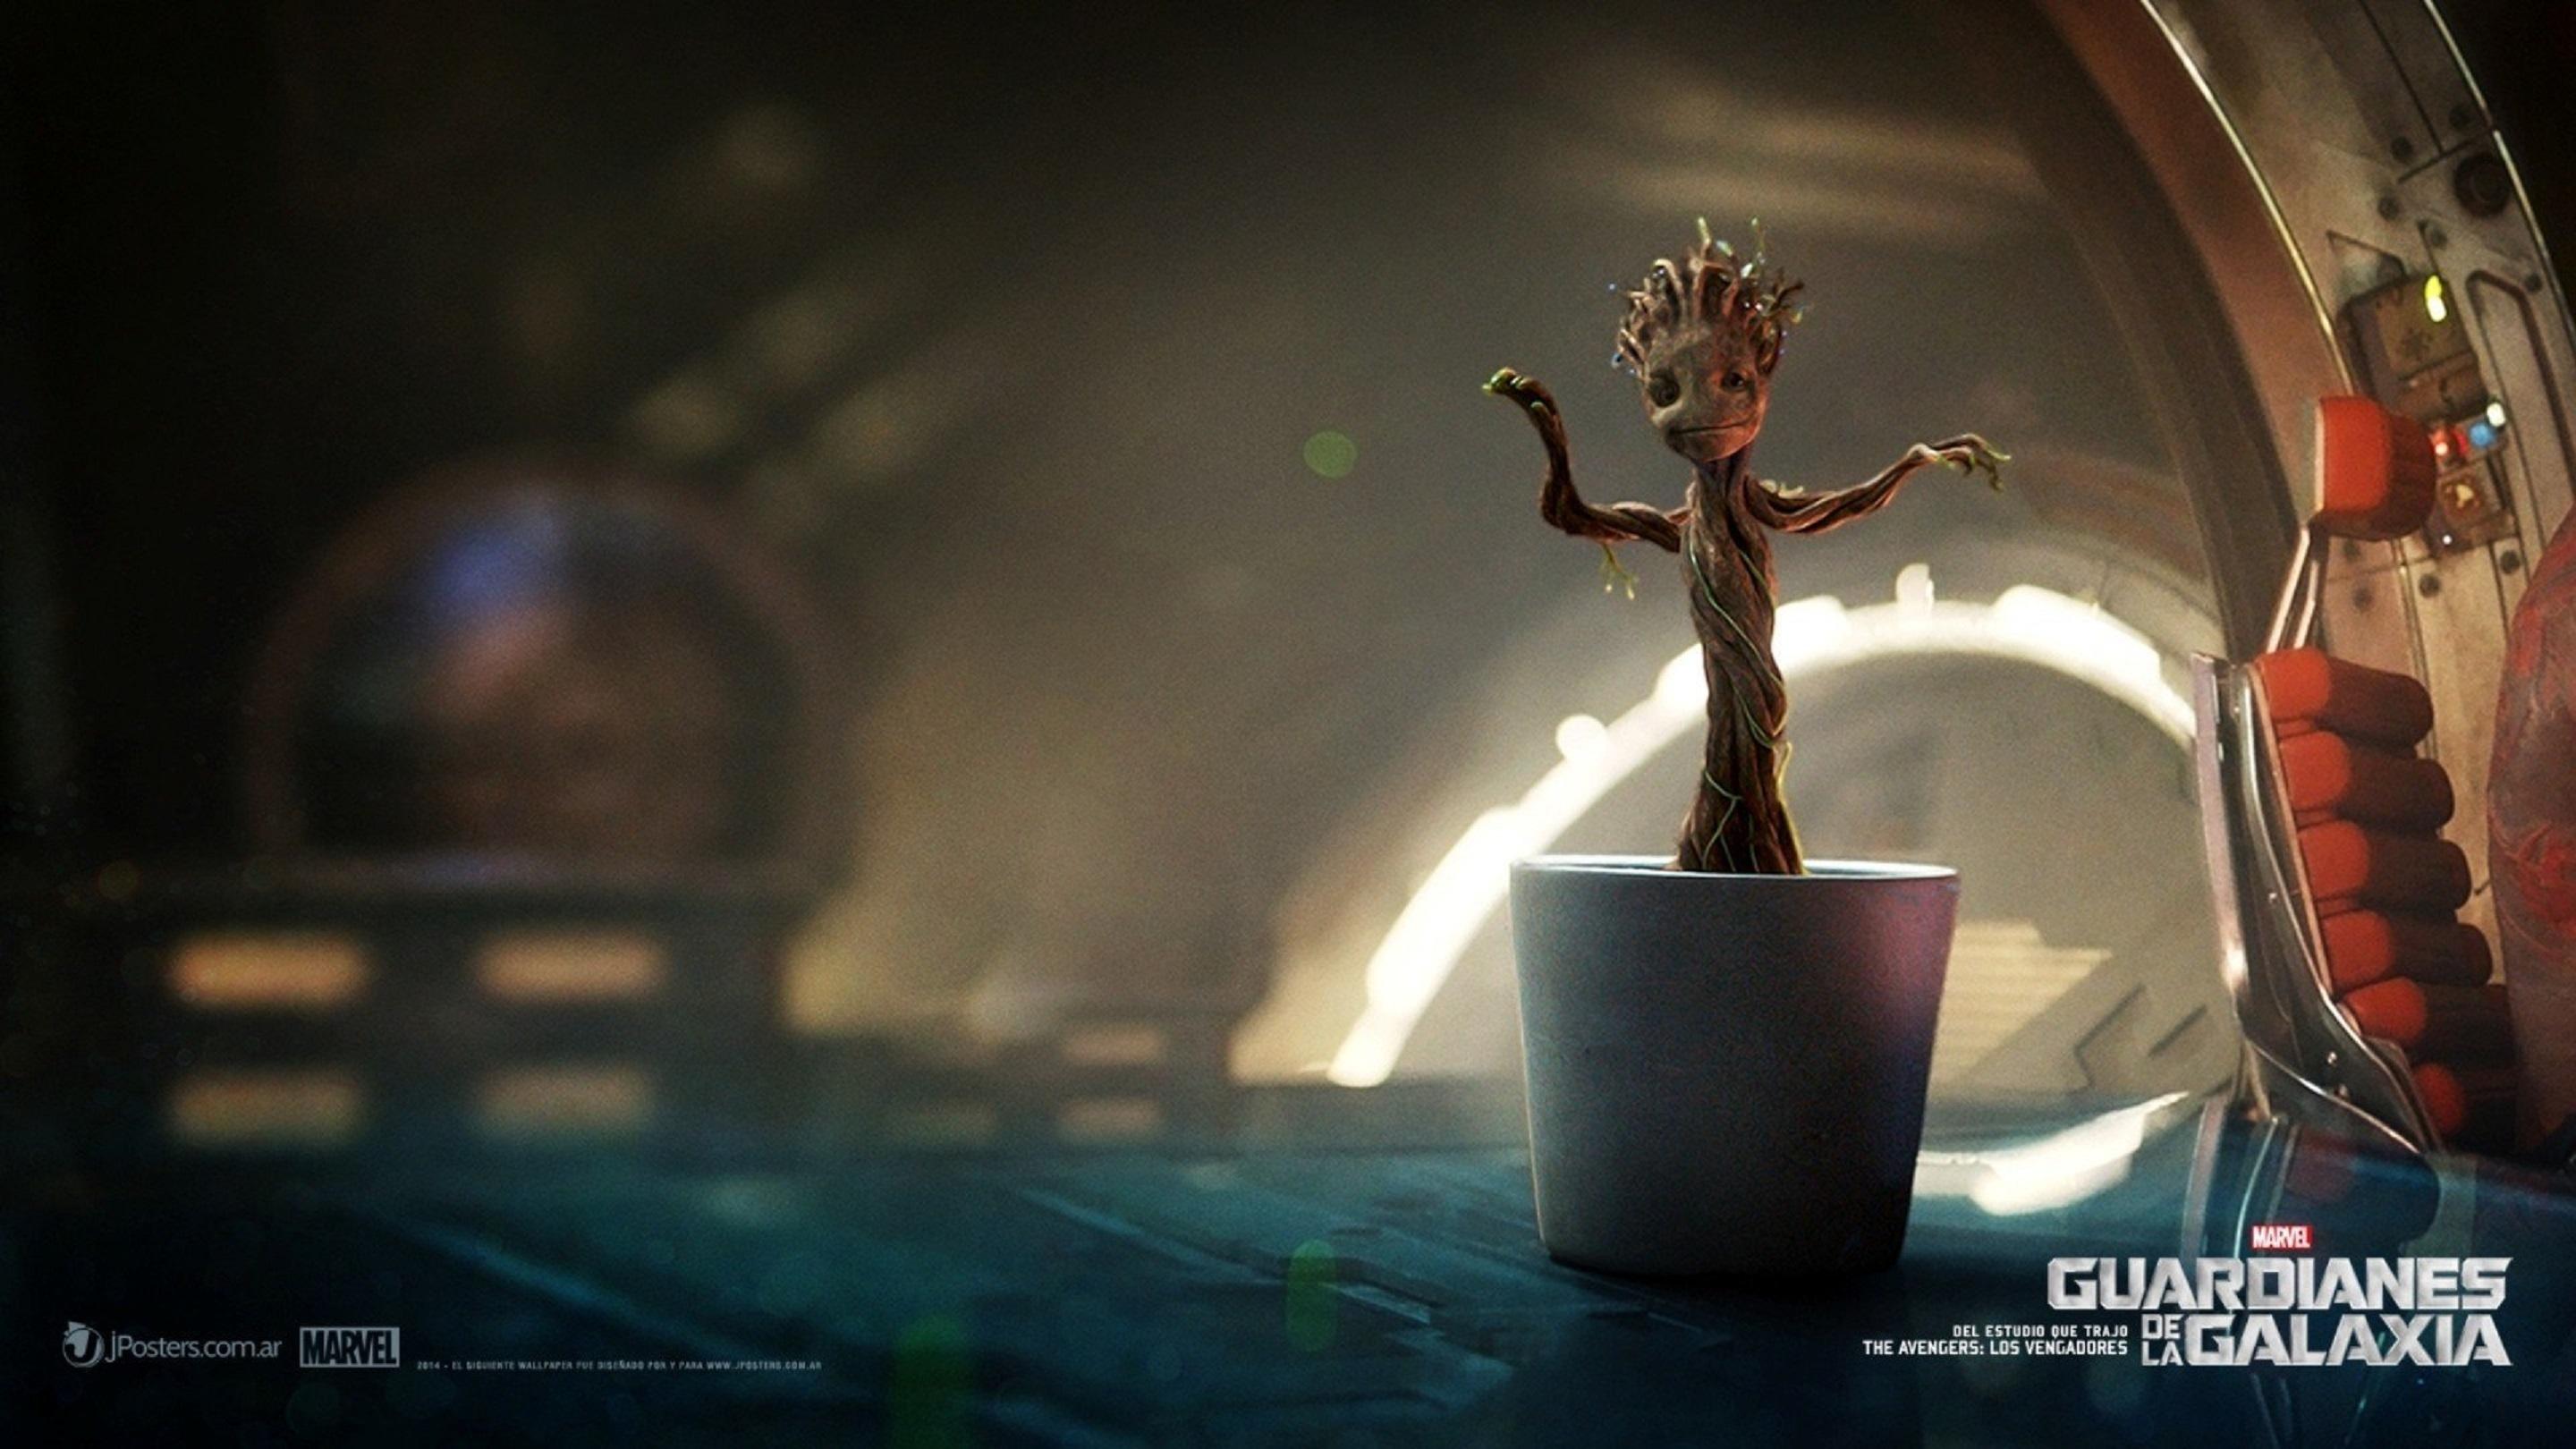 Collection of Baby Groot Wallpaper HD (image in Collection)